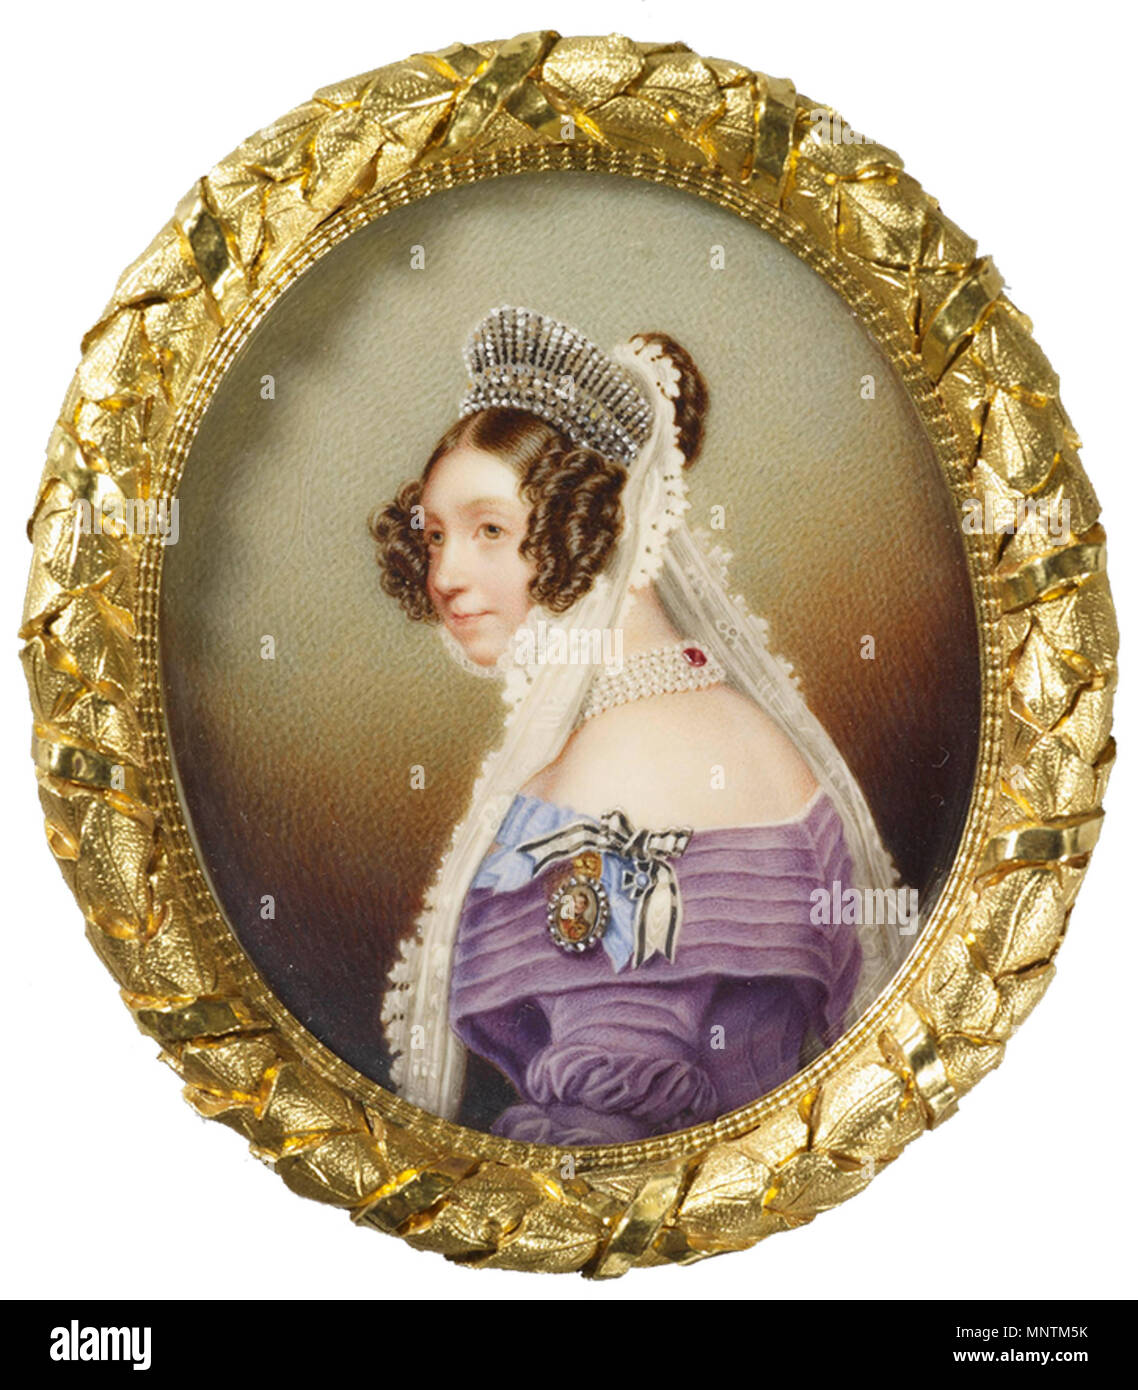 .  English: Frederica of Mecklenburg-Strelitz (1778-1841), Duchess of Cumberland, Queen of Hanover . 1846.   1035 Queen Frederica of Hannover Stock Photo